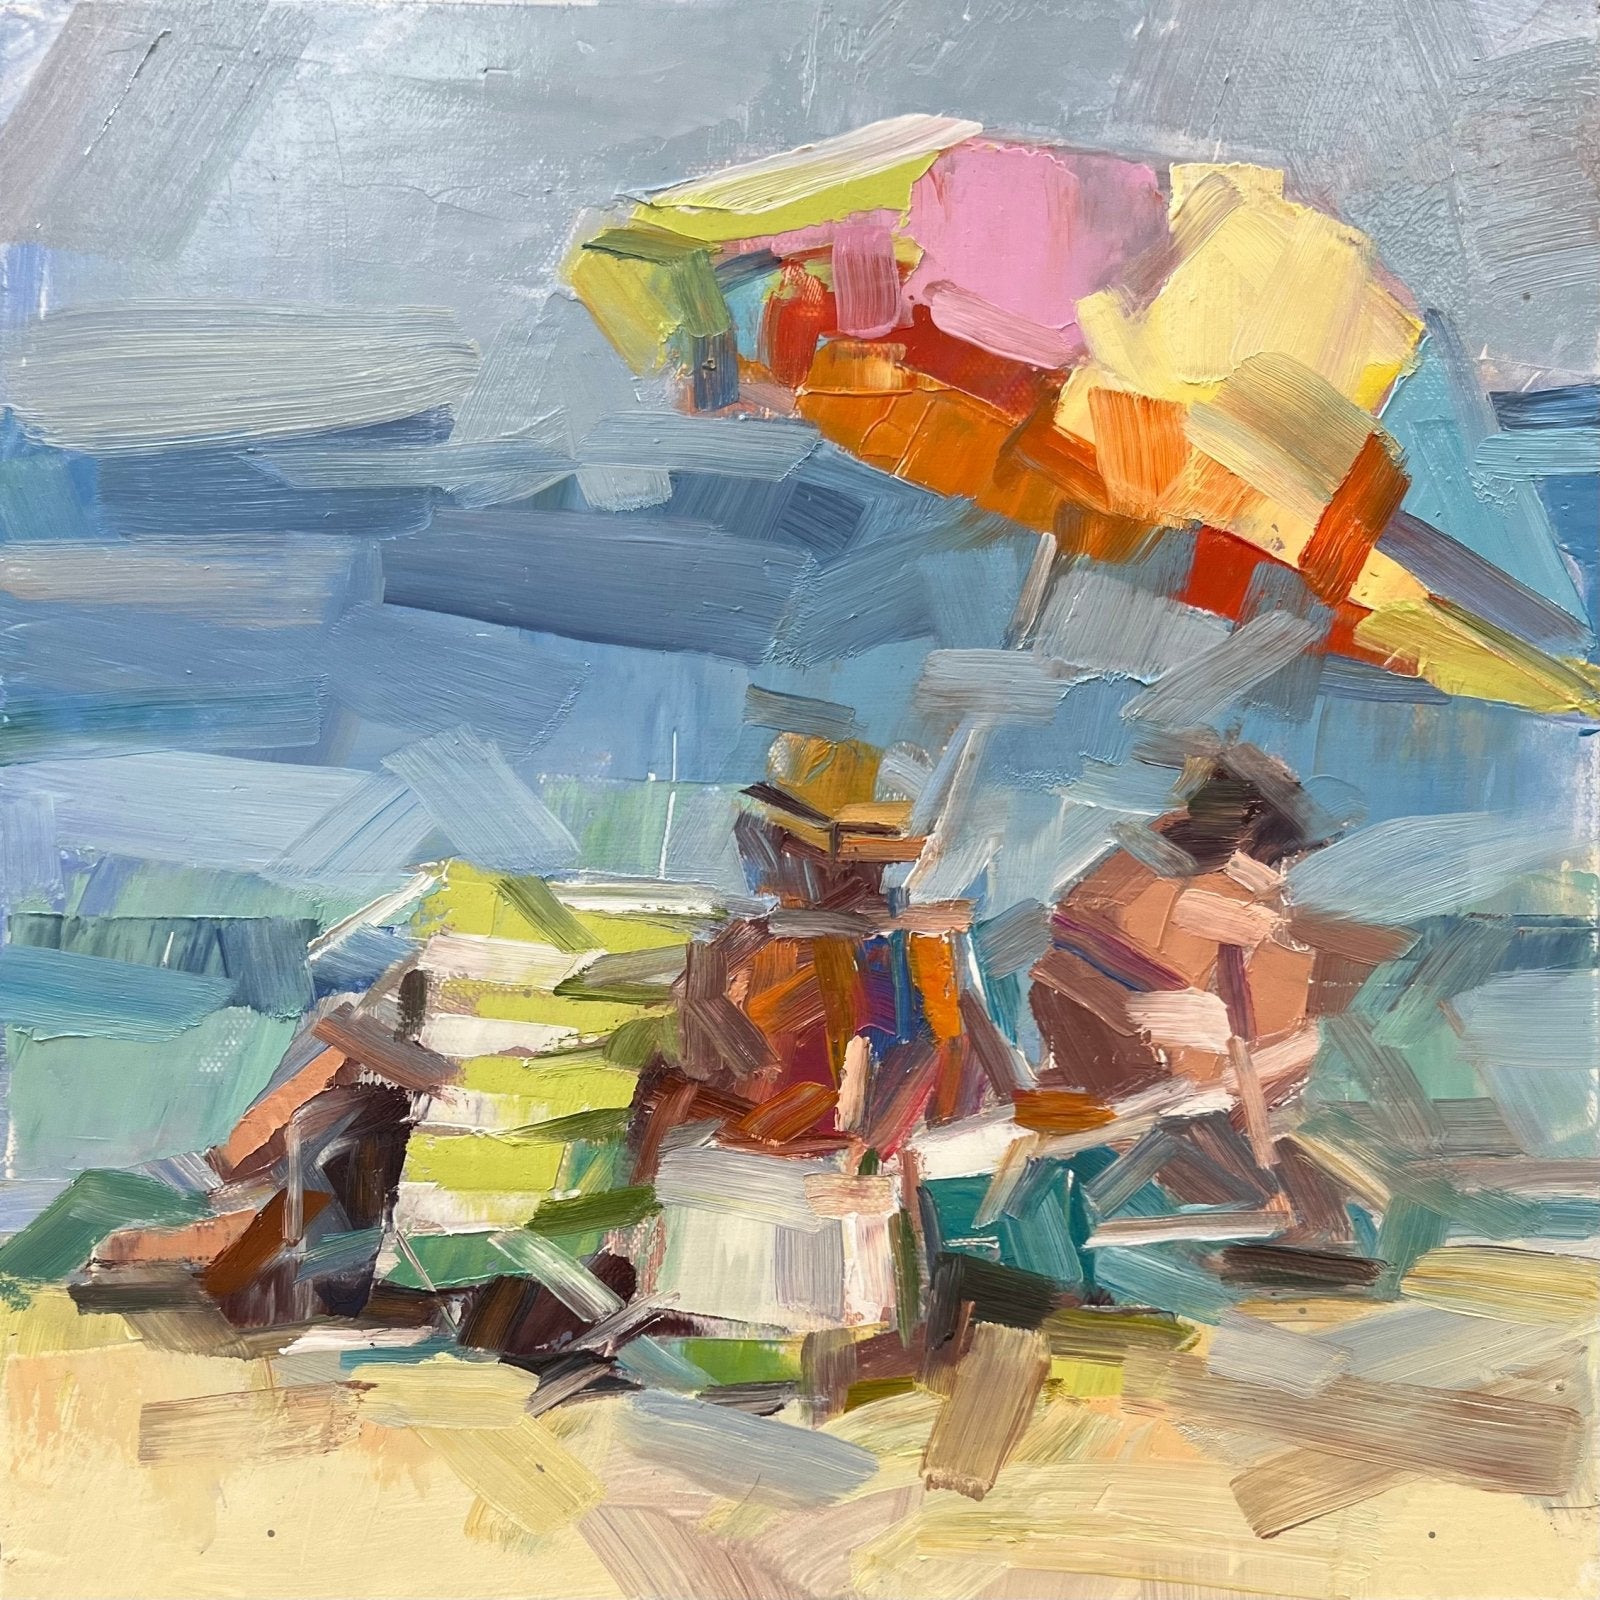 Umbrella Oasis by Curt Butler at LePrince Galleries